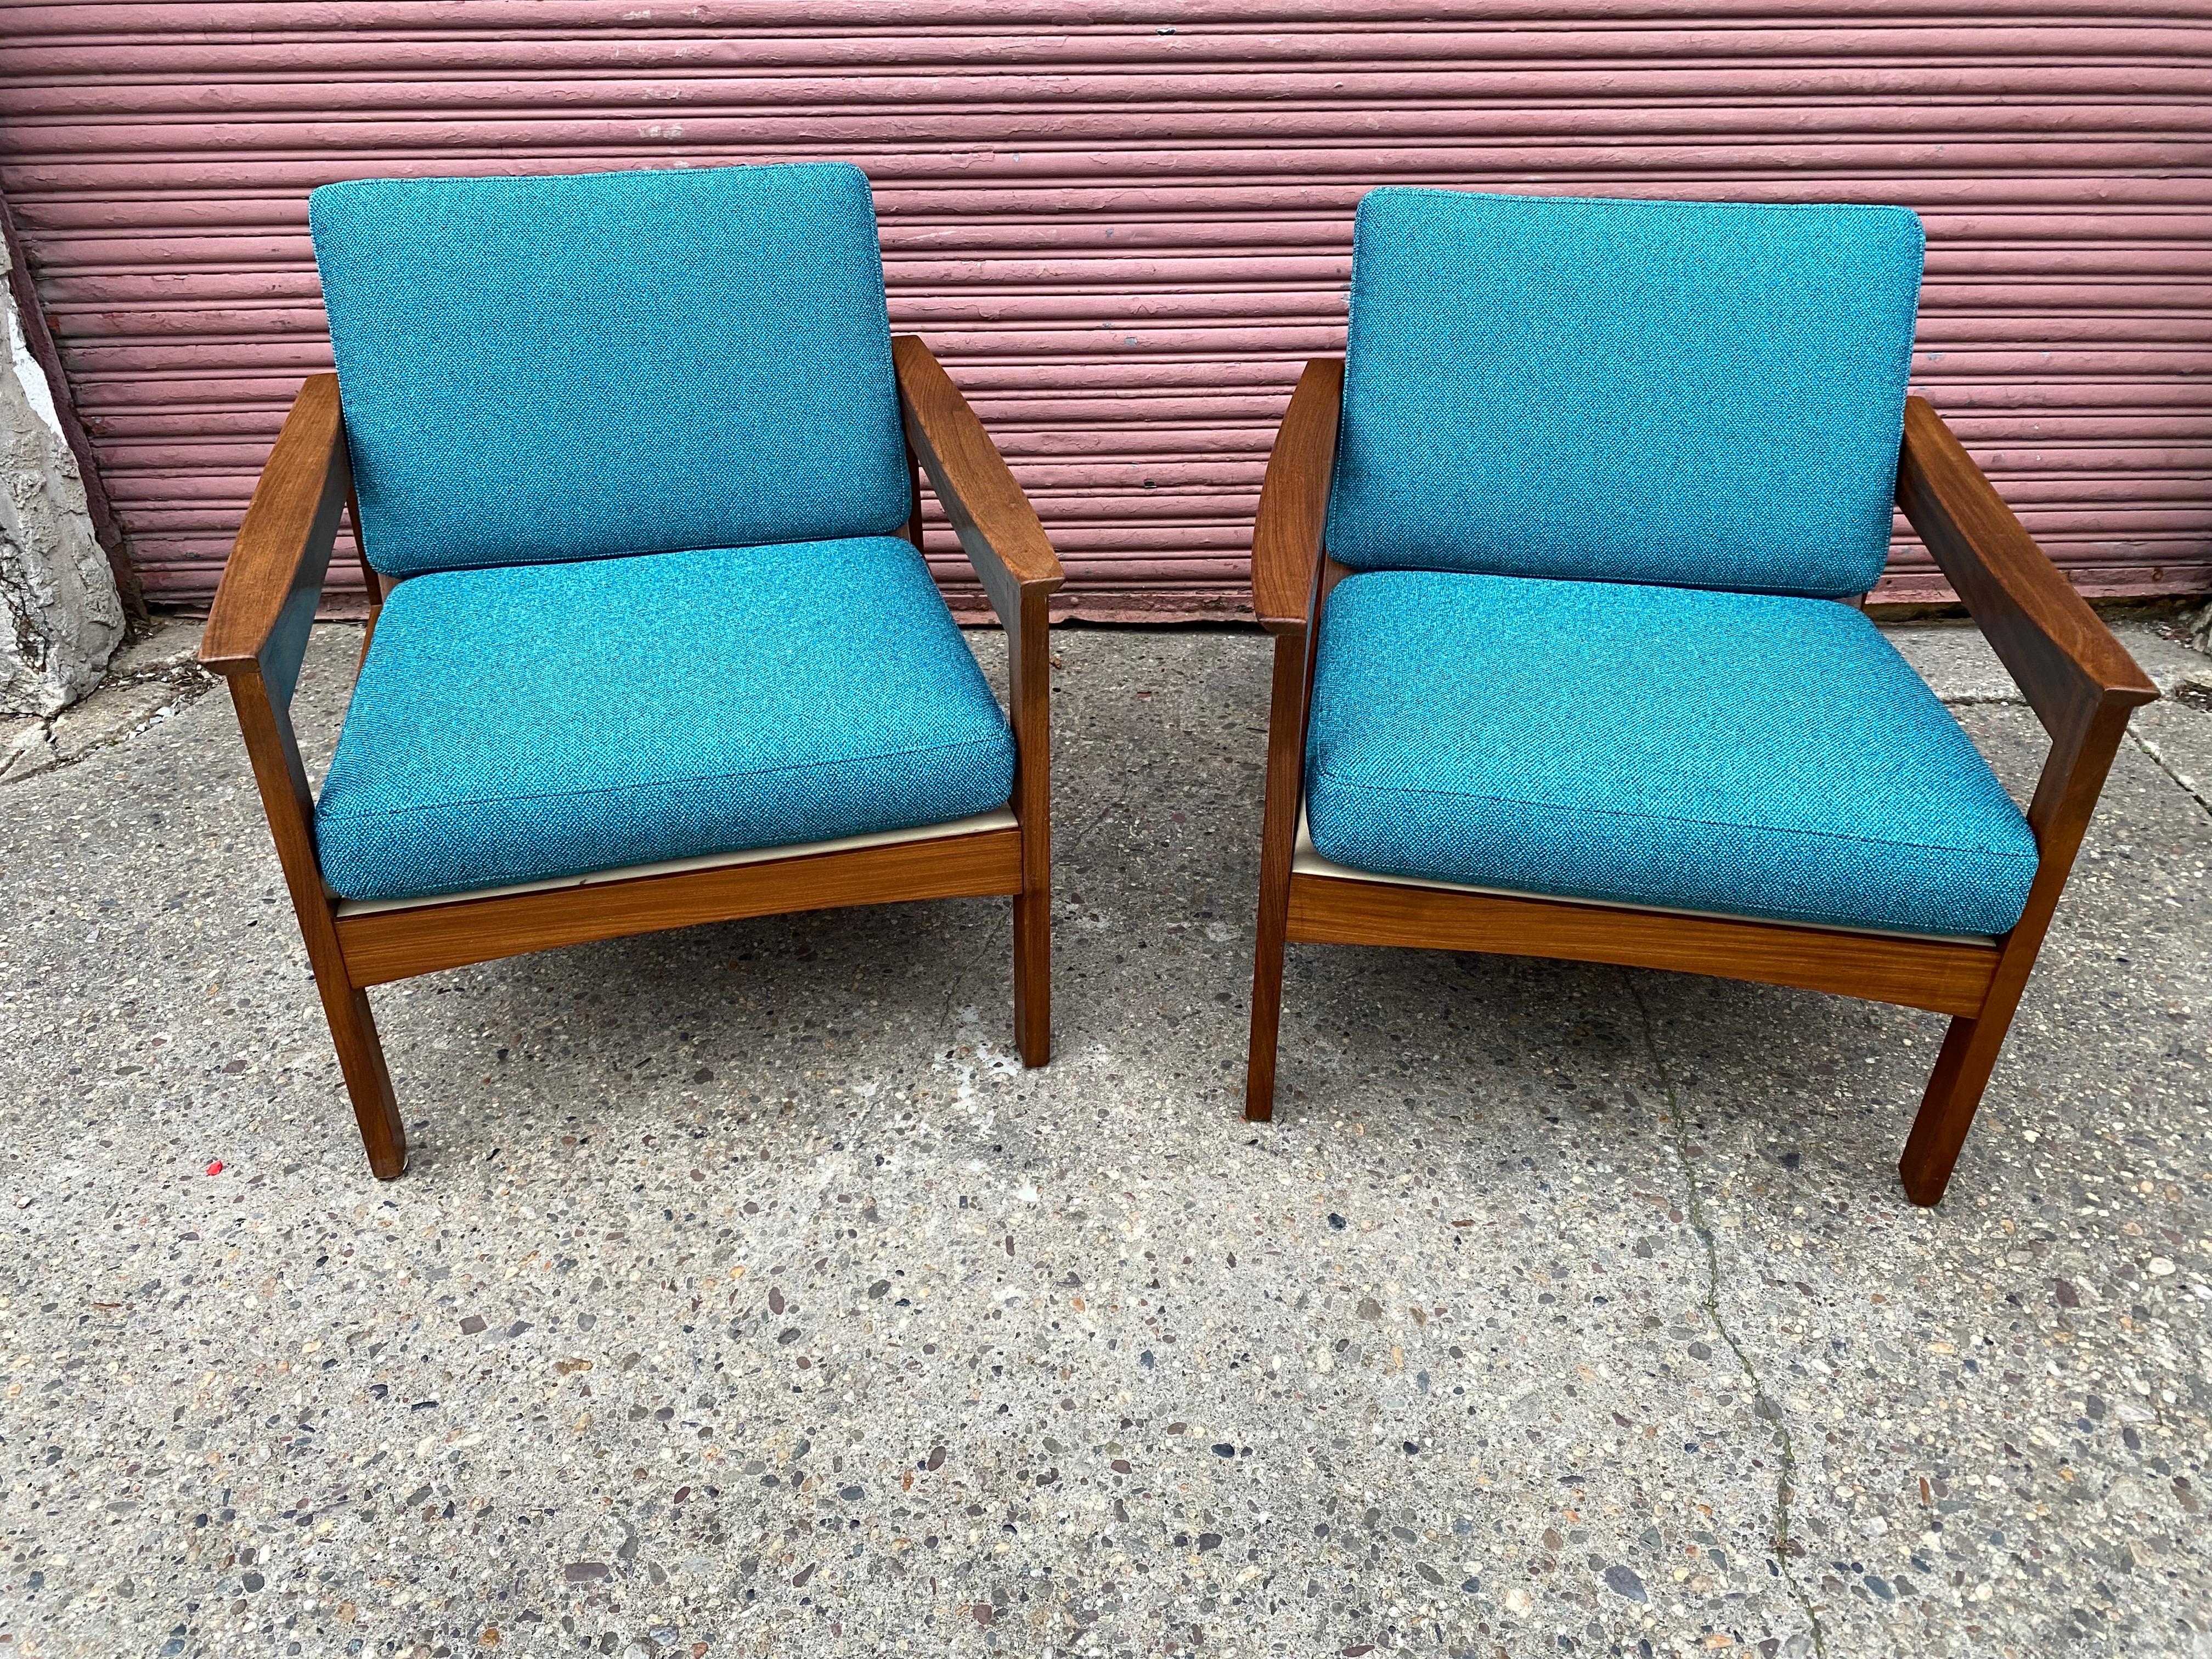 Pair of Solid Teak Open Arm Lounge Chairs attributed to Arne Wahl Iversen for Komfort, Made in Denmark.  New Upholstered Cushions in a fabric with multiple shades of blues.  Nice vertical back slats look great.  All solid wood construction and ready